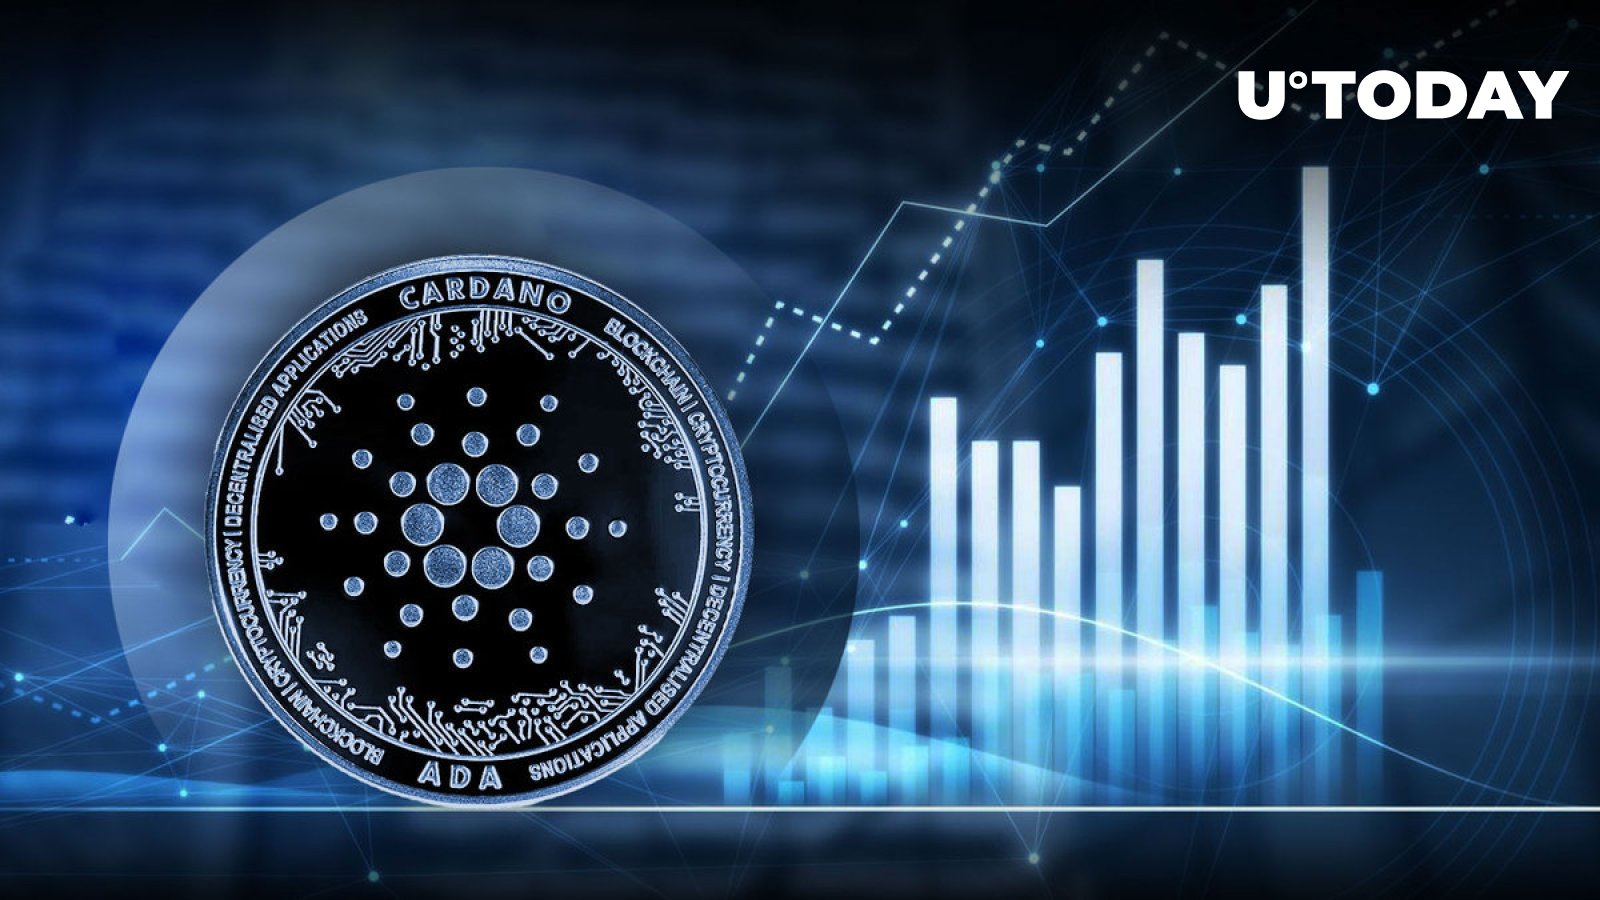 Cardano Soars: Records Remarkable Yearly Growth, Spikes With 24 Million Transactions